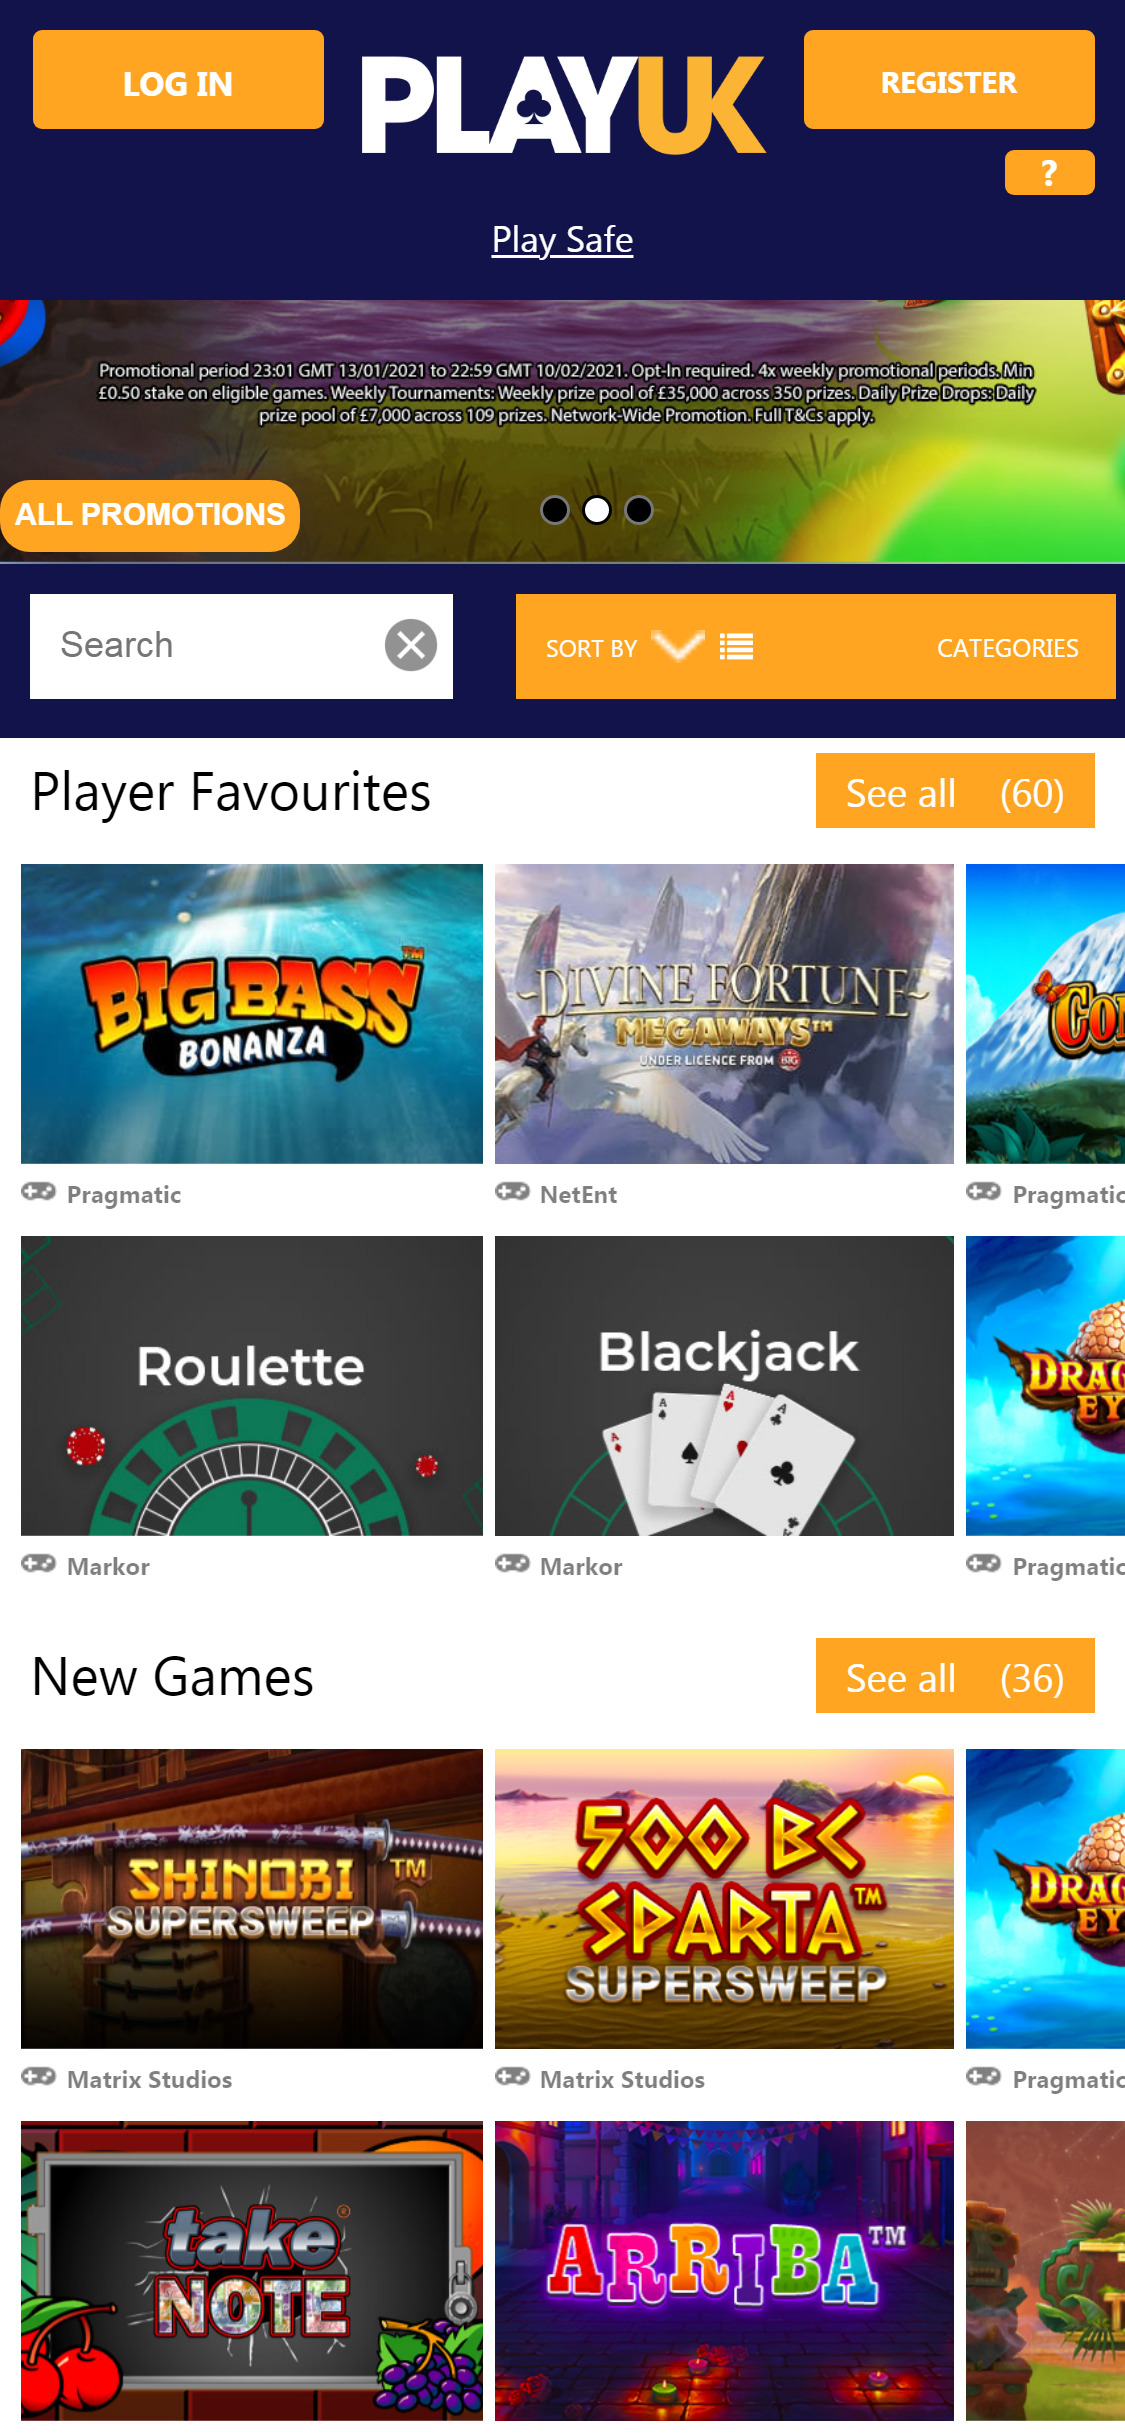 Play UK Casino Mobile Games Review